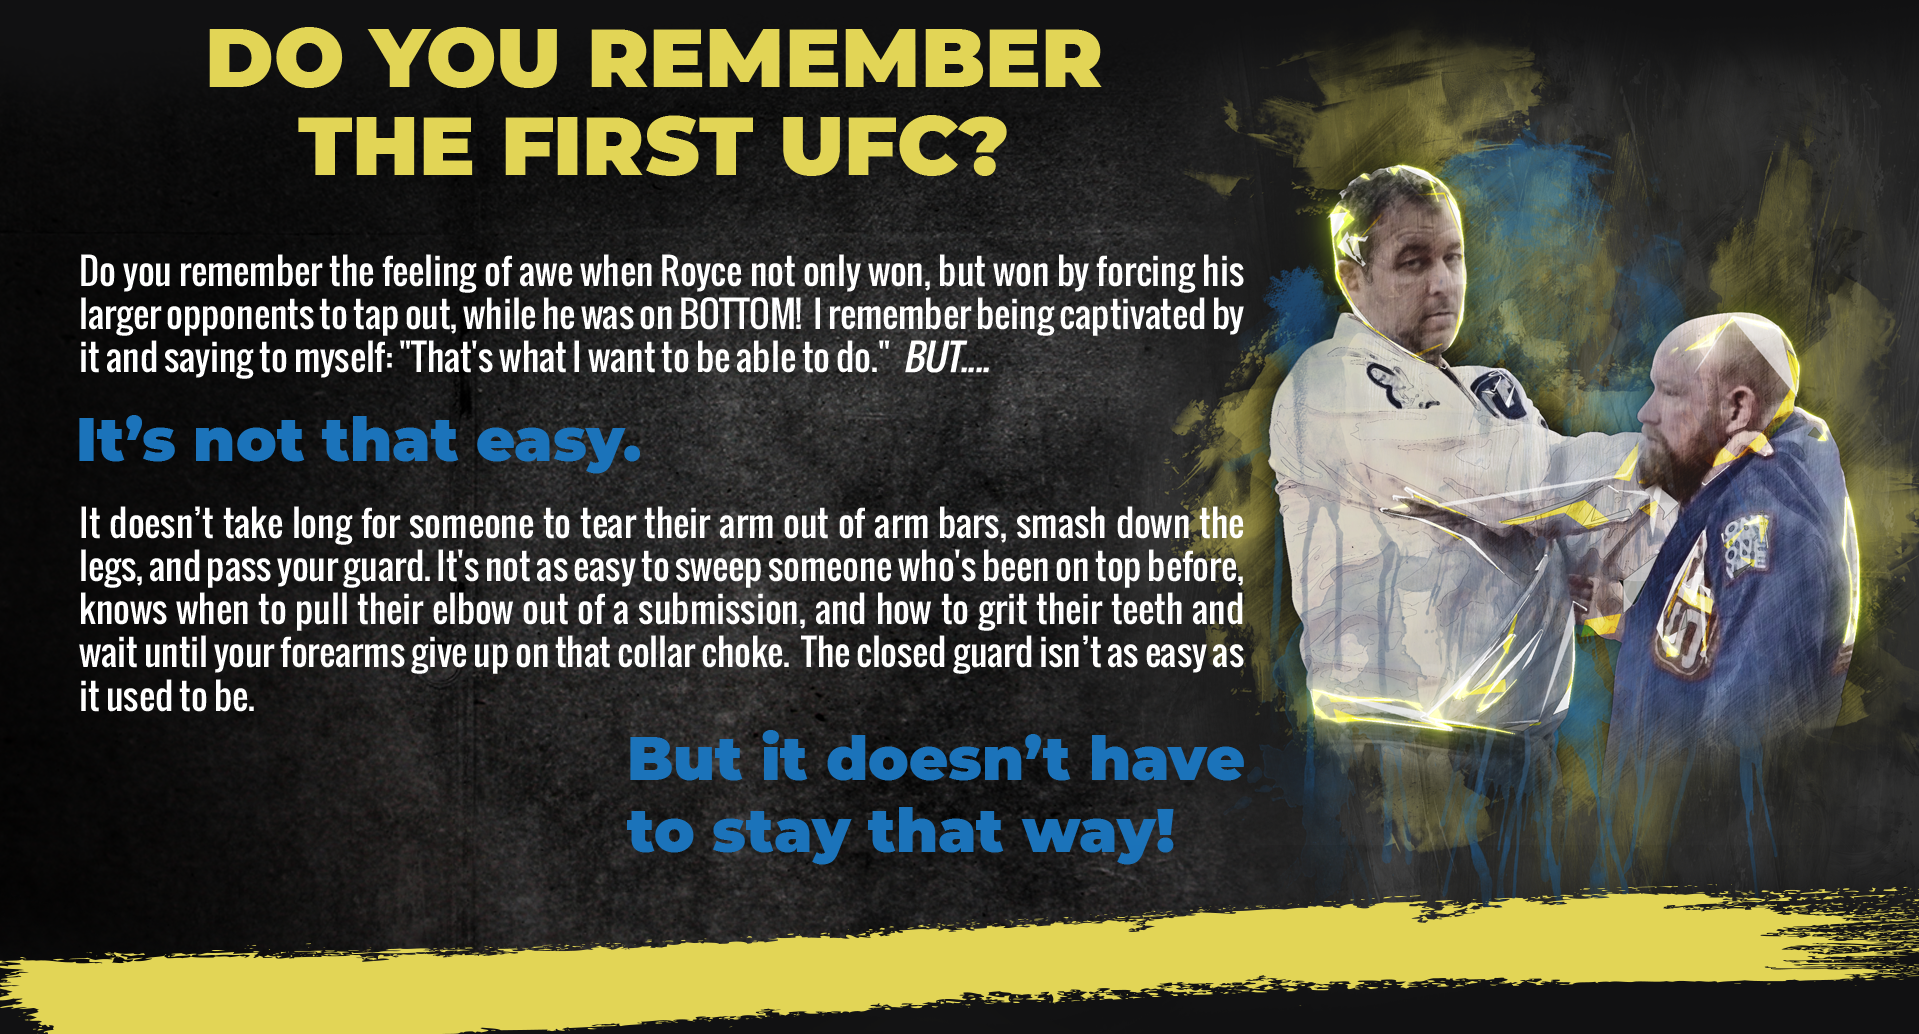 Do you remember the first UFC? Do you remember the feeling of awe when Royce not only won, but won by forcing his larger opponents to tap out, while he was on BOTTOM! I remember being captivated by it and saying to myself: “That’s what I want to be able to do.” BUT… It’s not that easy. It doesn’t take long to tear their arm out of arm bars, smash down the legs, and pass your guard. It’s not as easy to sweep someone whos been on top before, knows when to pull their elbow out of a submission, and how to grit their teeth and wait until you forearms give up on that collar choke. The closed guard isn’t as easy as it used to be. But it doesn’t have to stay that way!